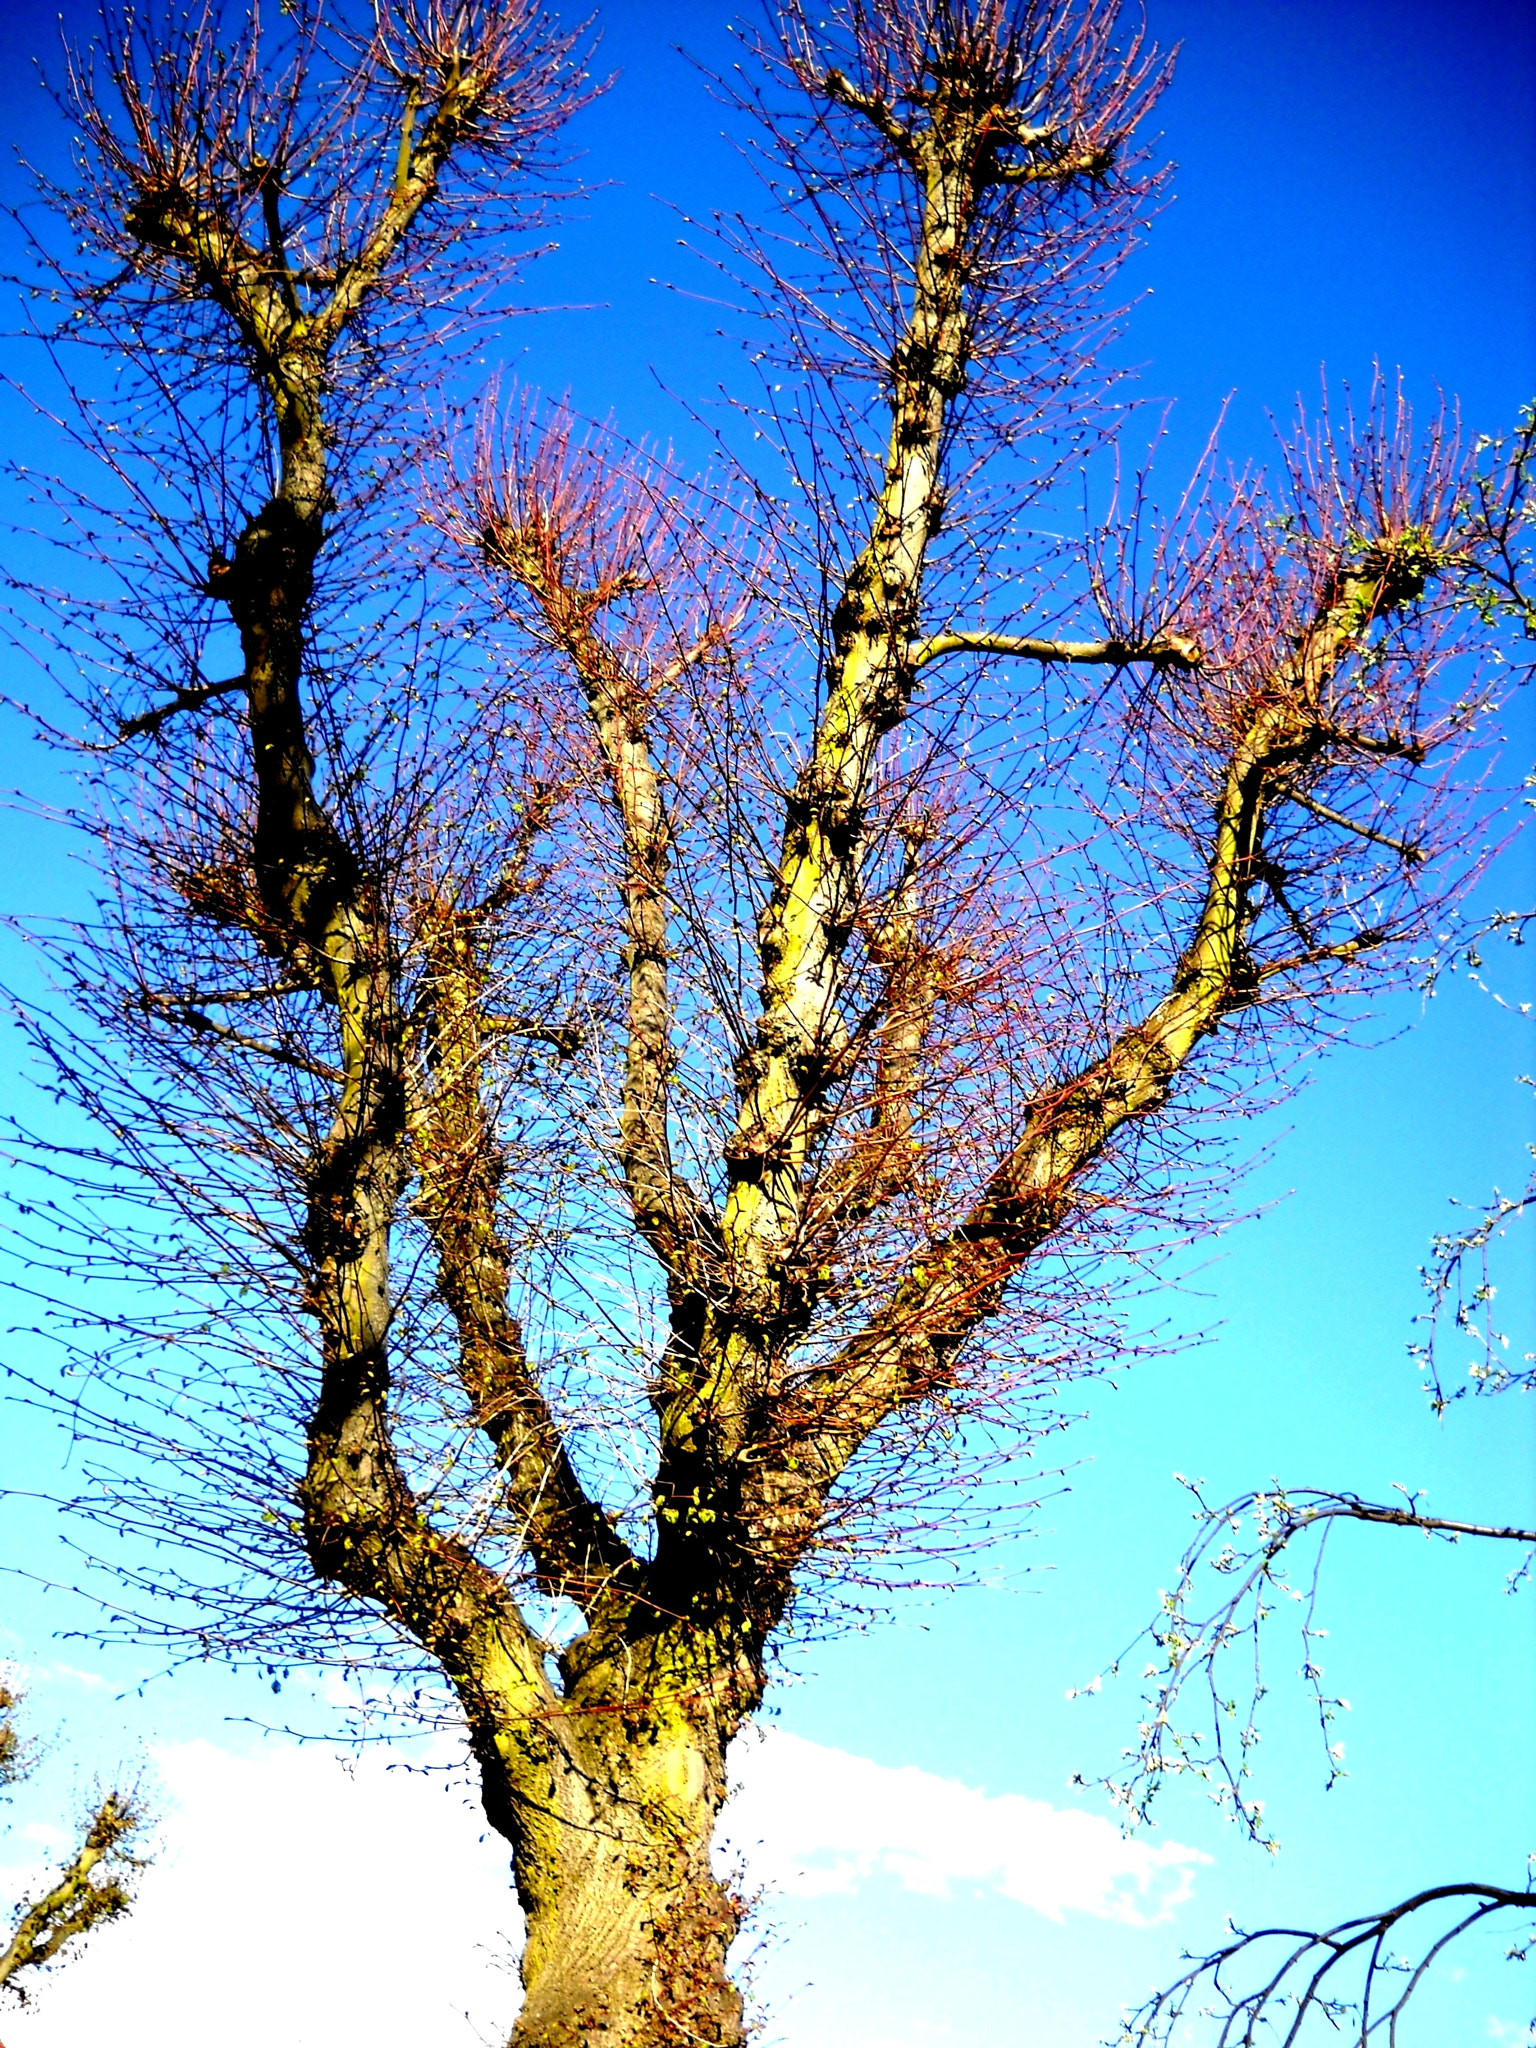 Nikon Coolpix L20 sample photo. Tree before eruption of leaves photography